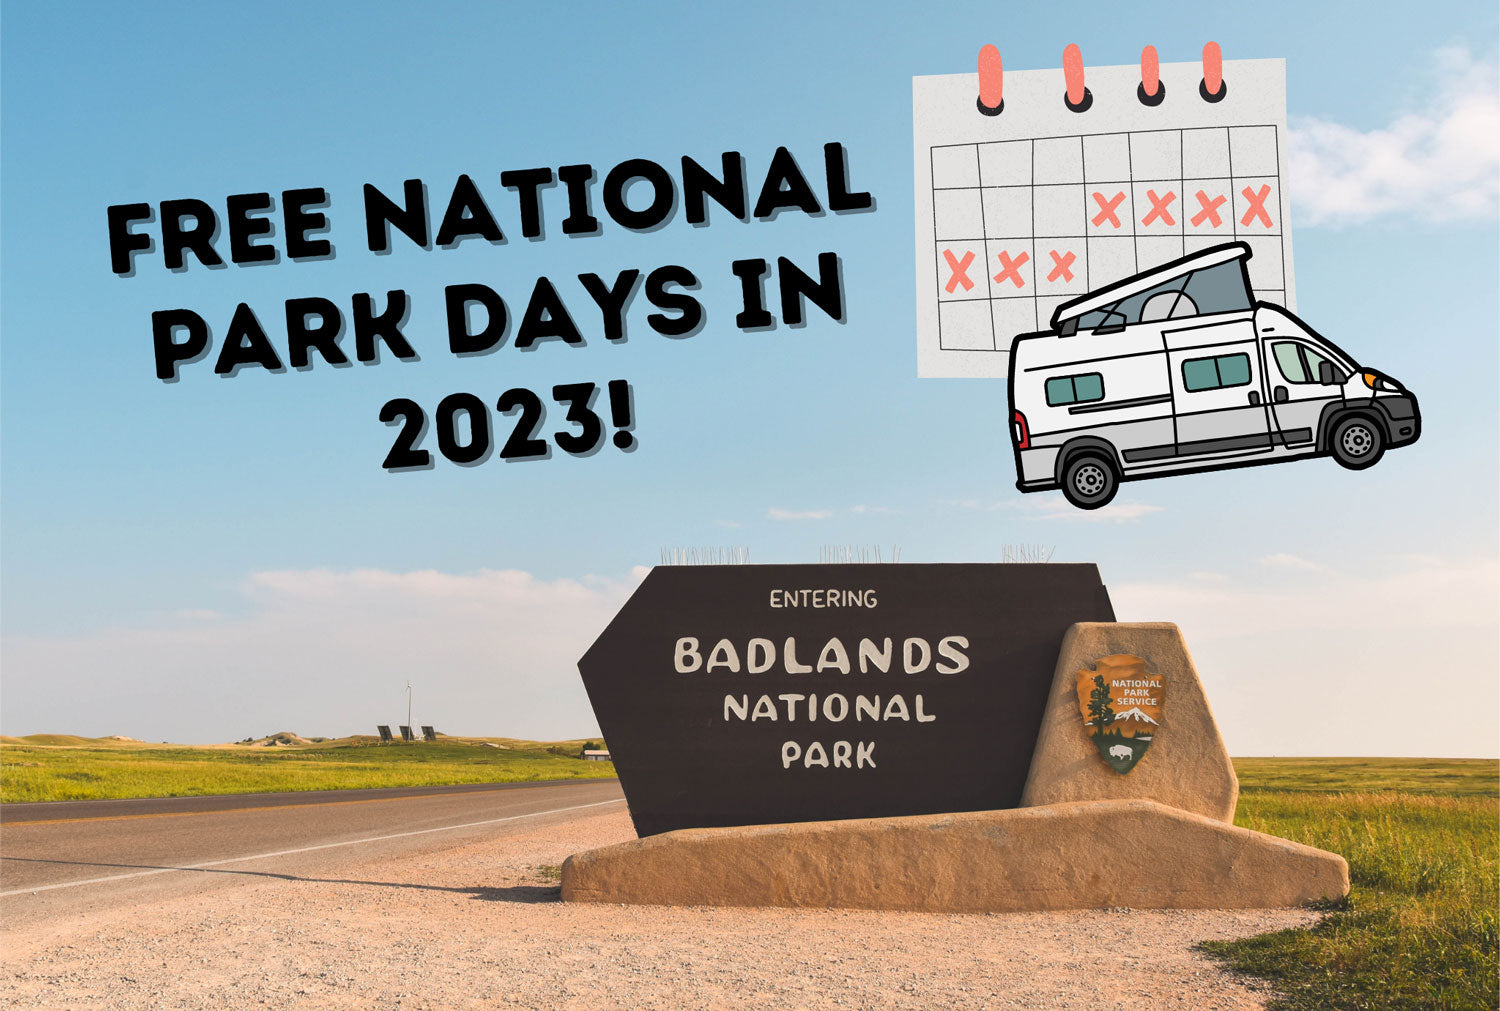 National parks will be free to visit on these dates in 2023!